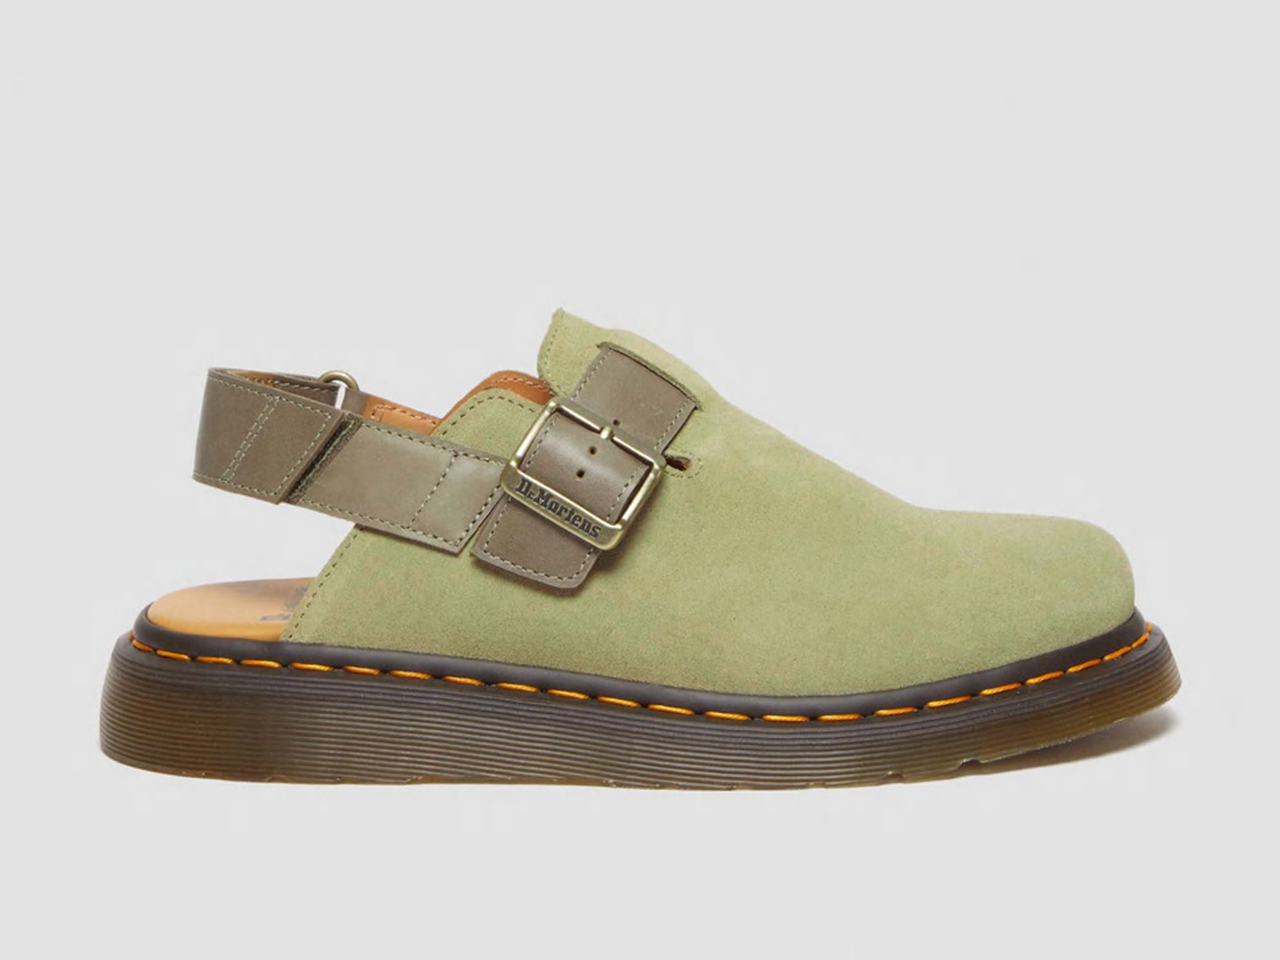 A side view of a pair of slingback green suede clogs from Dr. Martens.